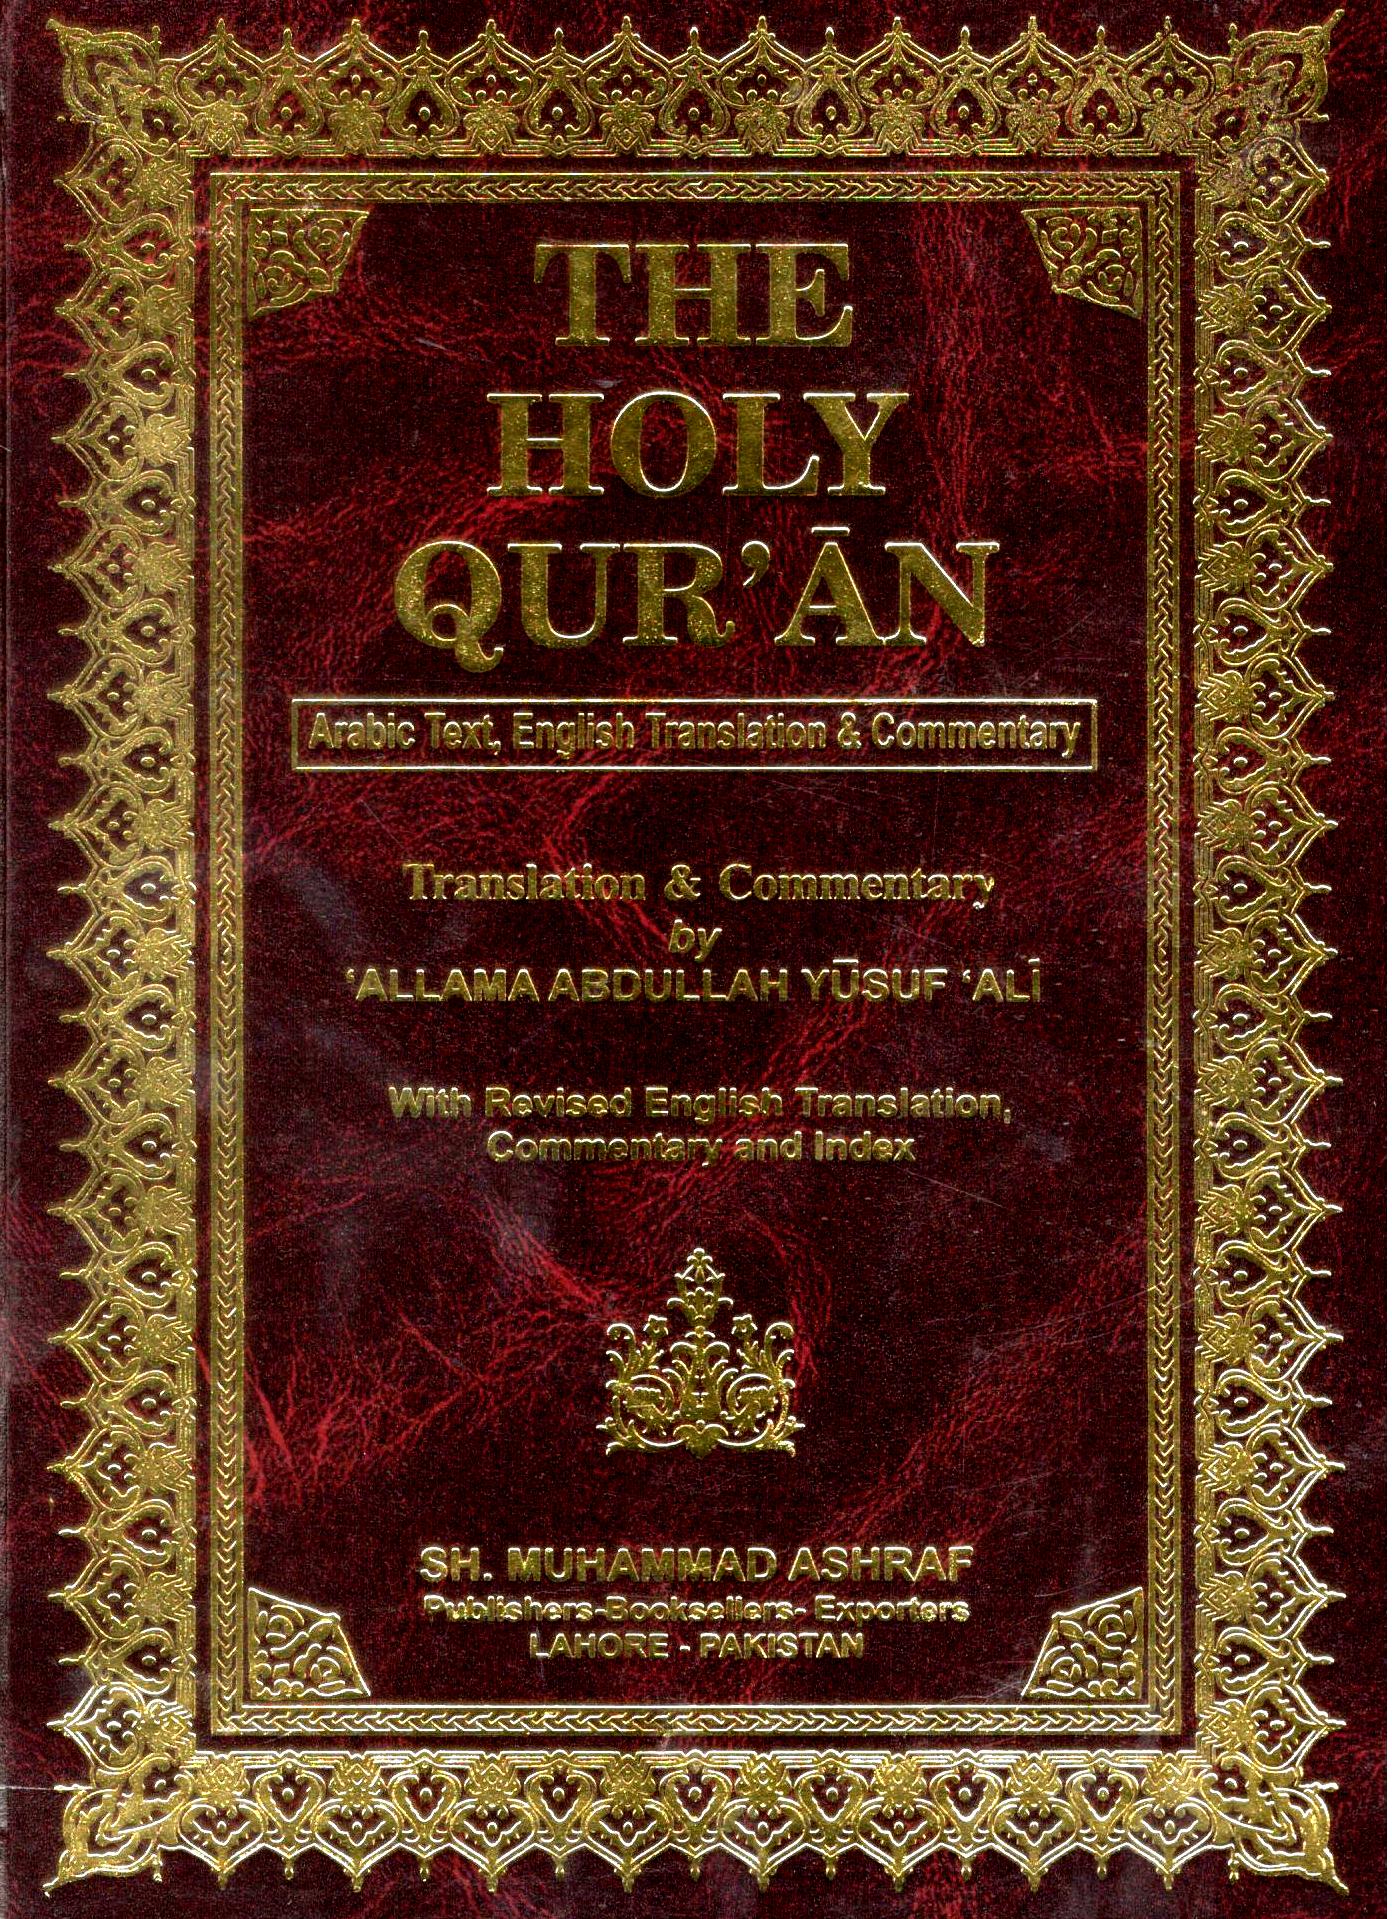 The Holy Quran - Abdullah Yusuf Ali - Complete in 3 Volumes